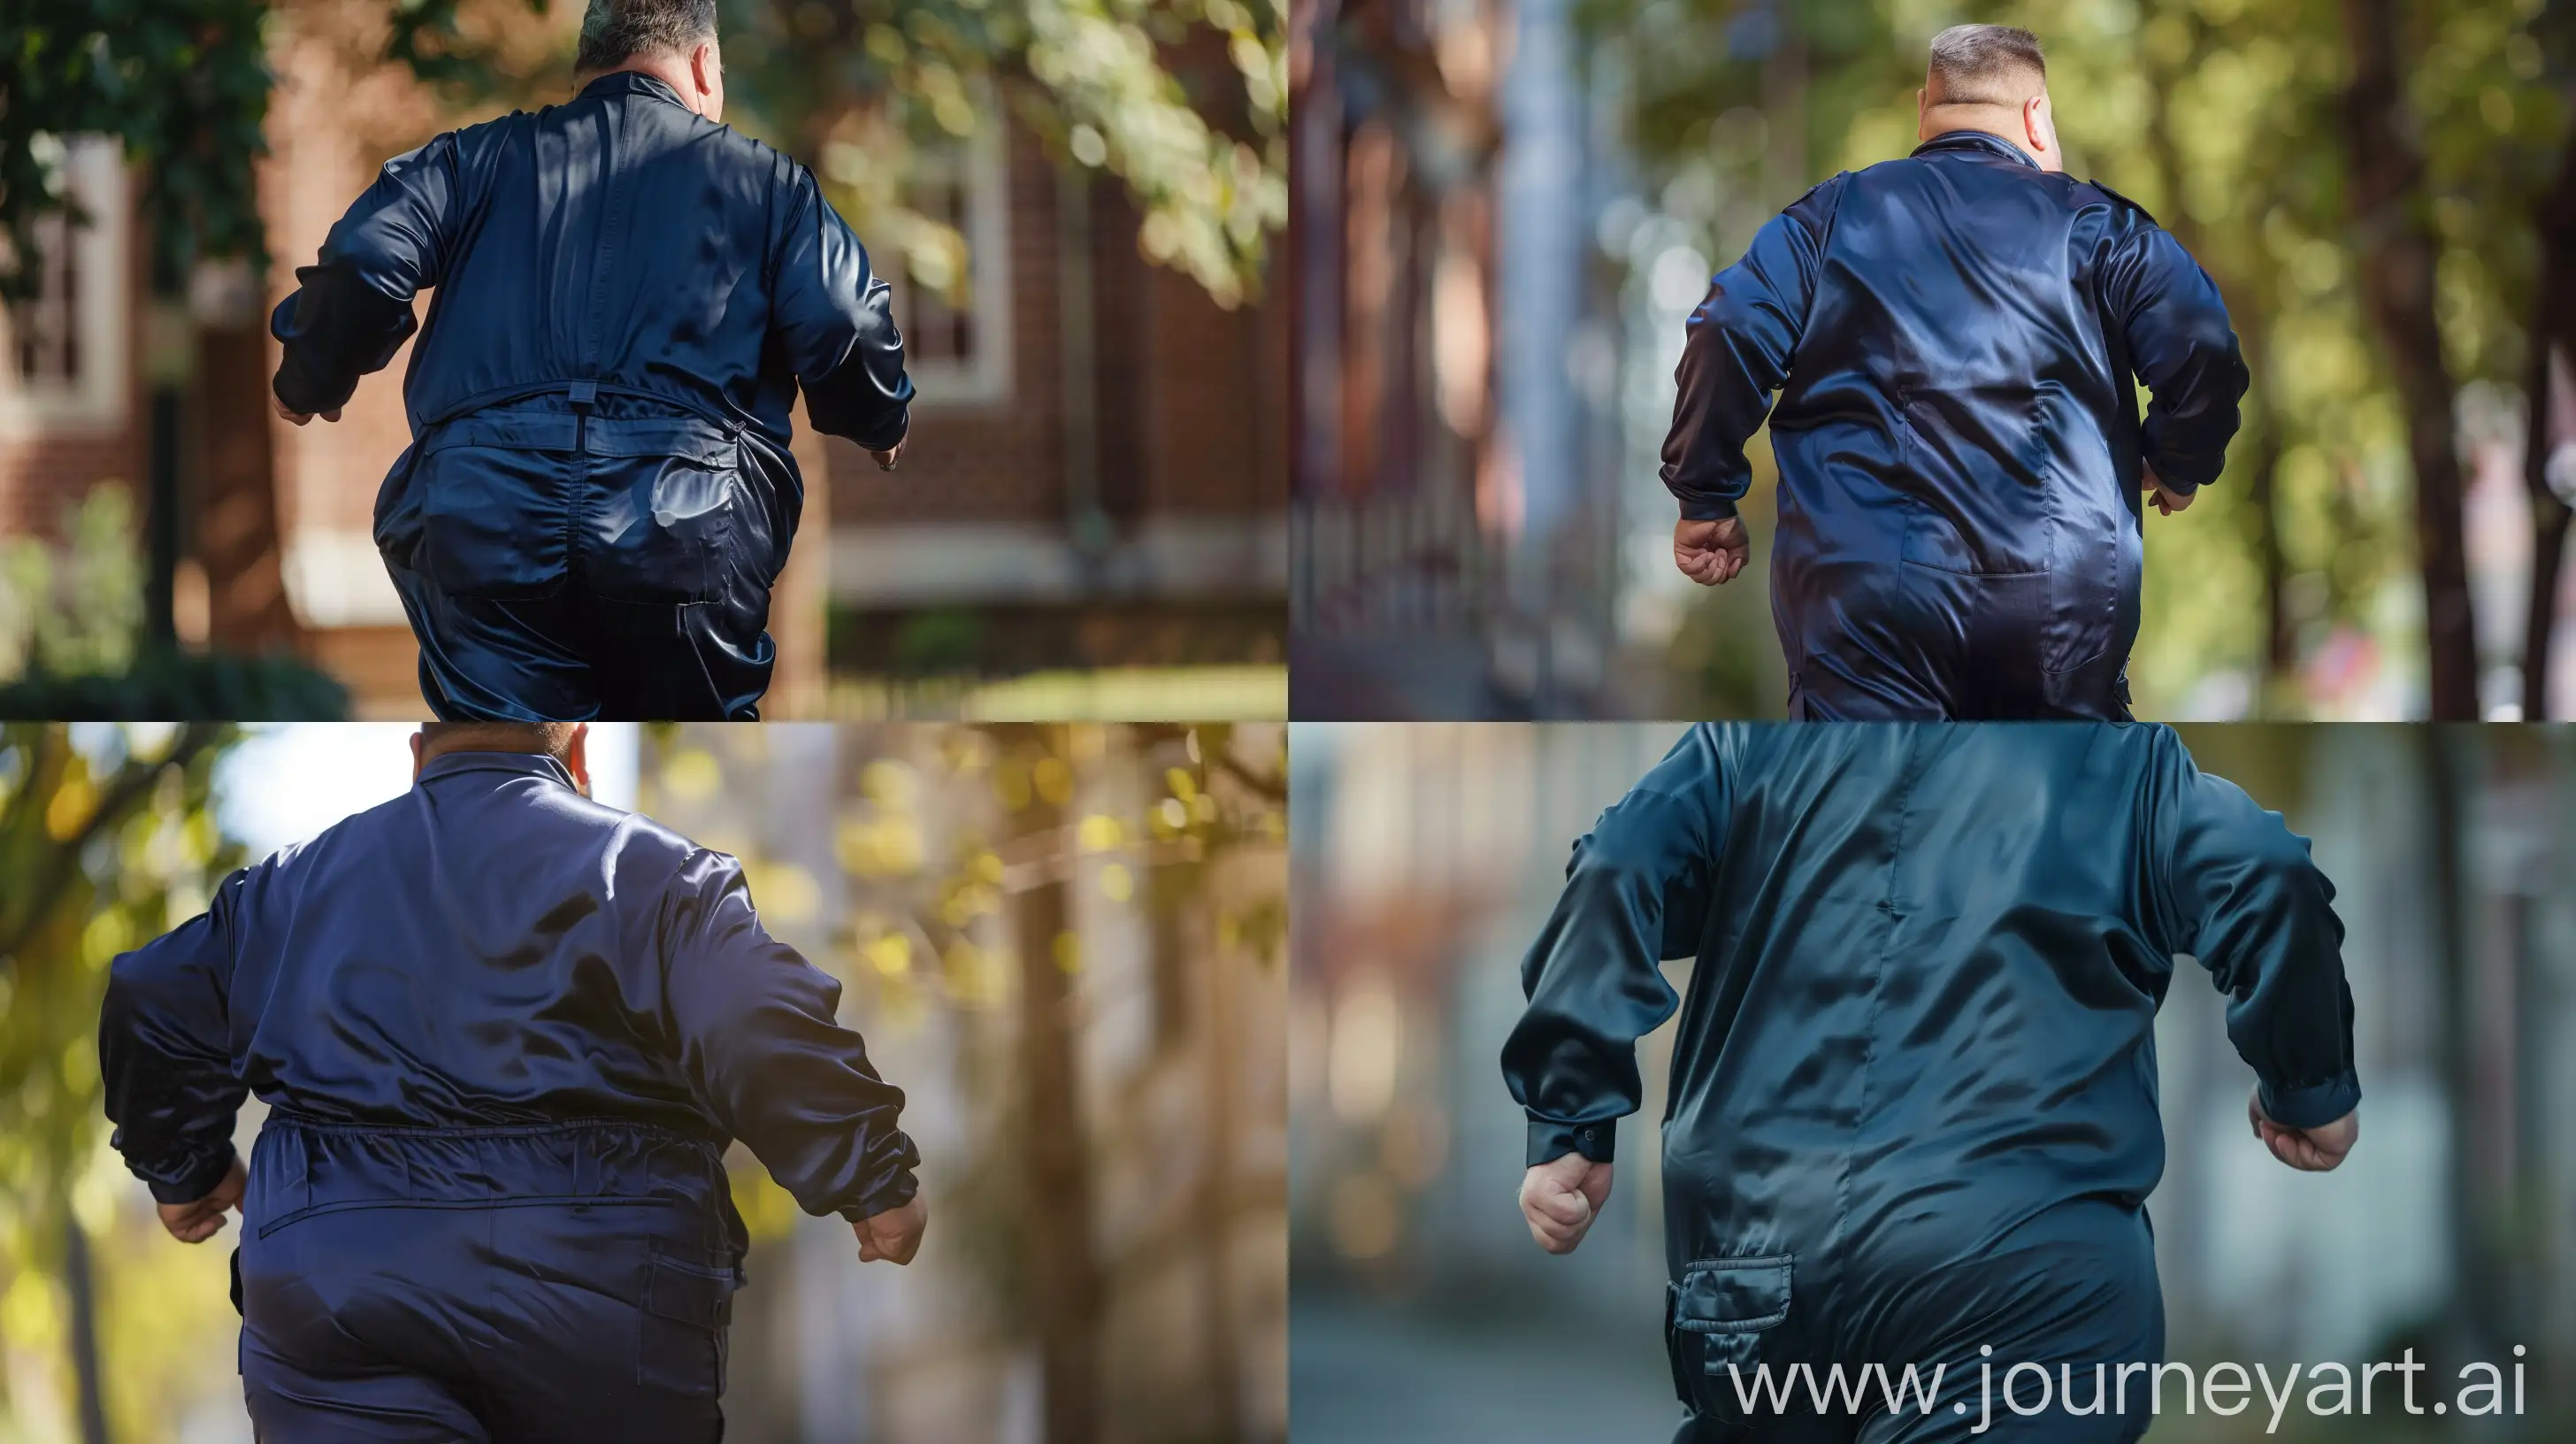 Energetic-60YearOld-Man-in-Stylish-Navy-Blue-Cargo-Coverall-Running